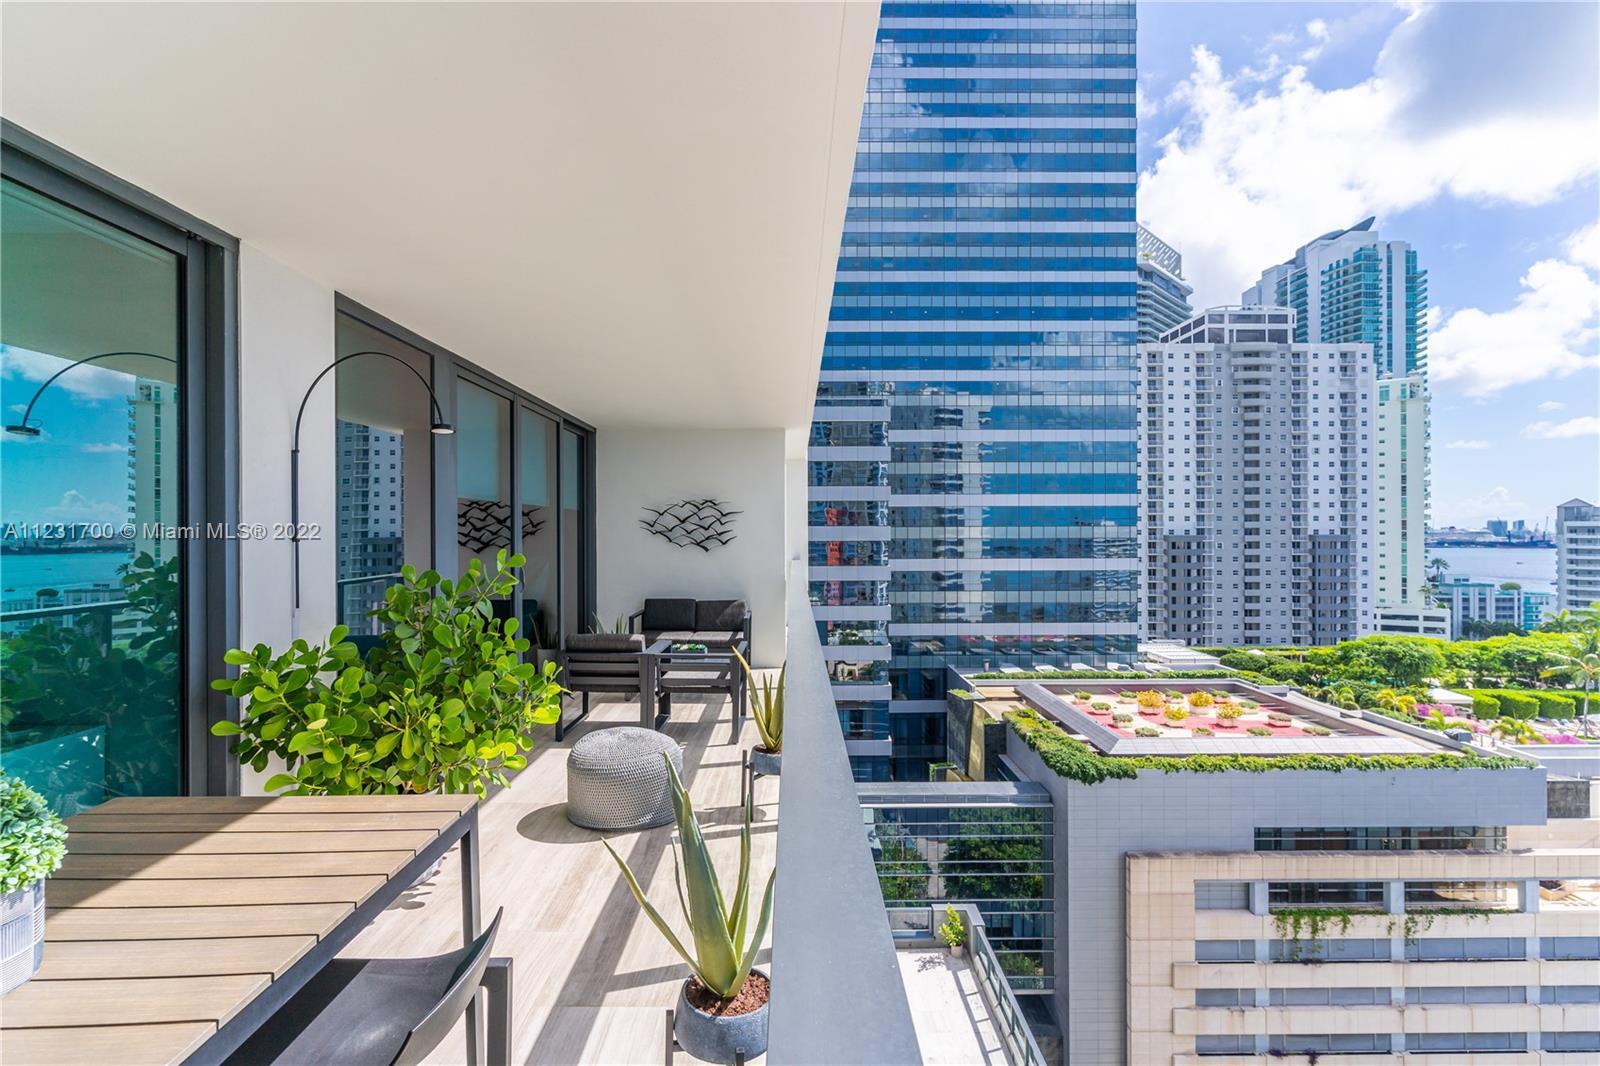 This boutique residential high rise is the most exclusive building in Brickell designed by world ren